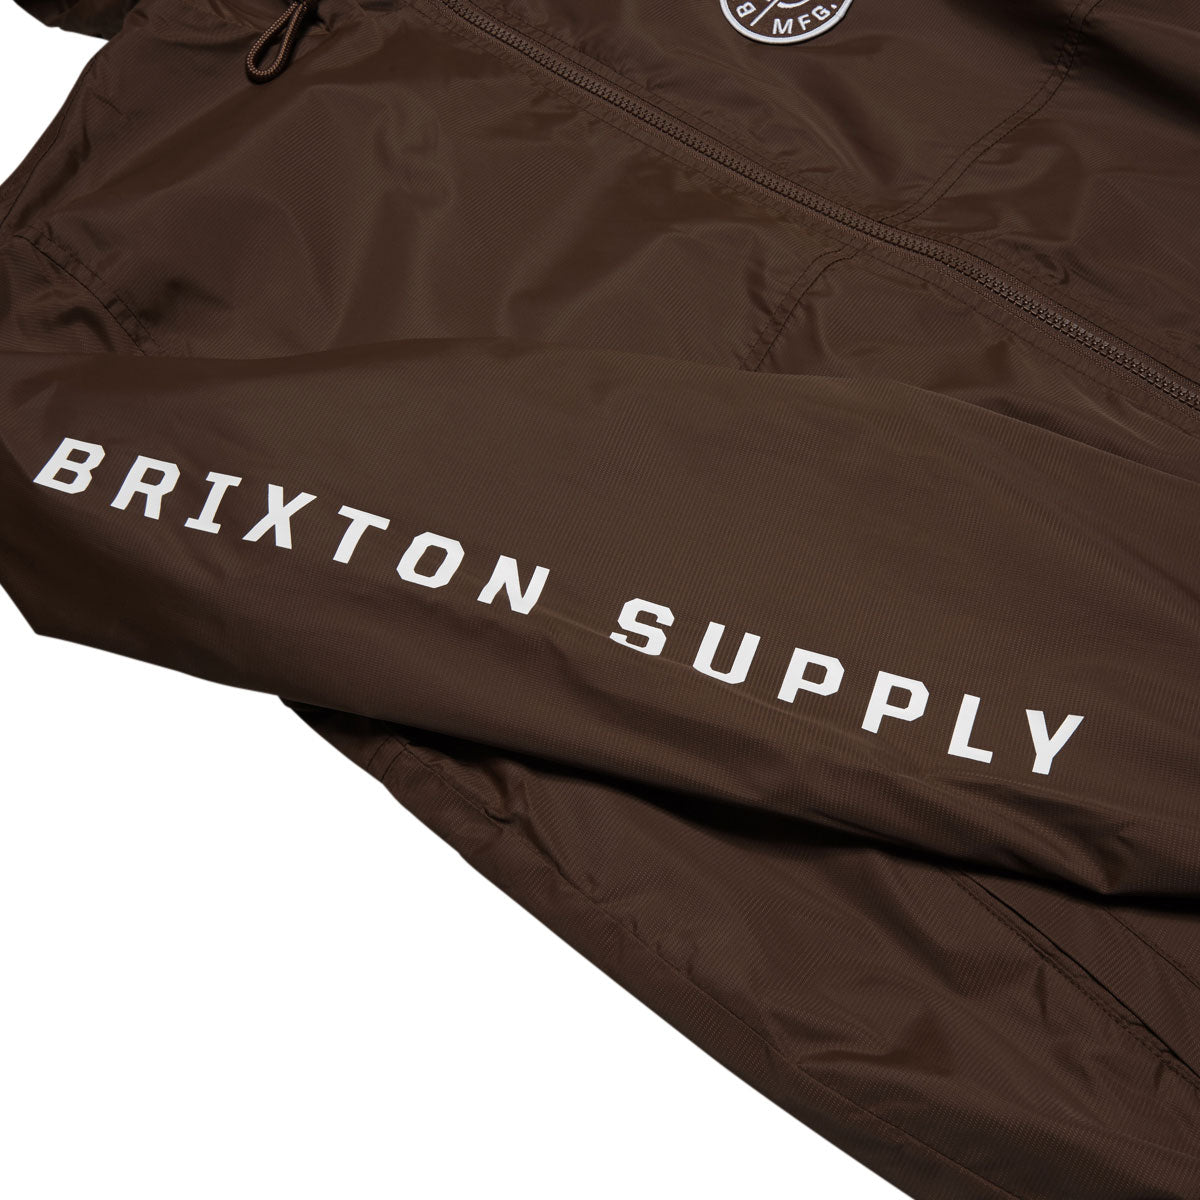 Brixton Claxton Crest Lined Hooded Jacket - Bison image 4